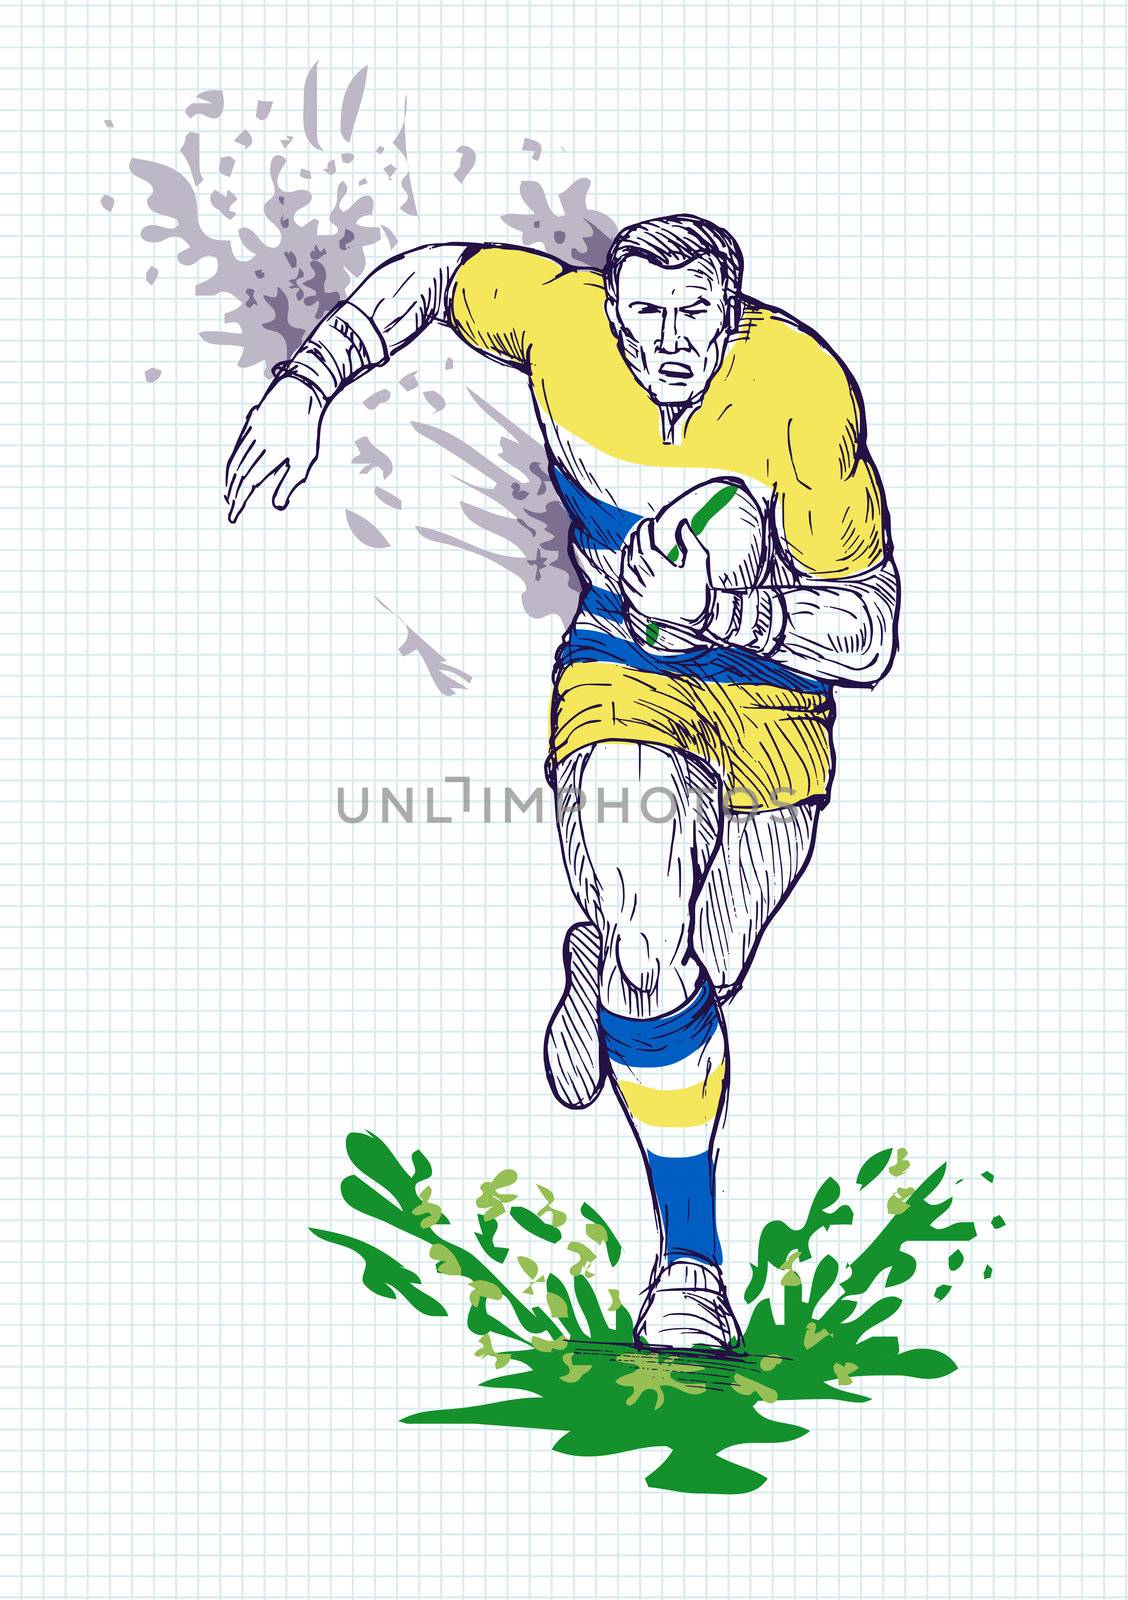 illustration of a hand sketch 
Rugby player running and passing ball with grid in the background.